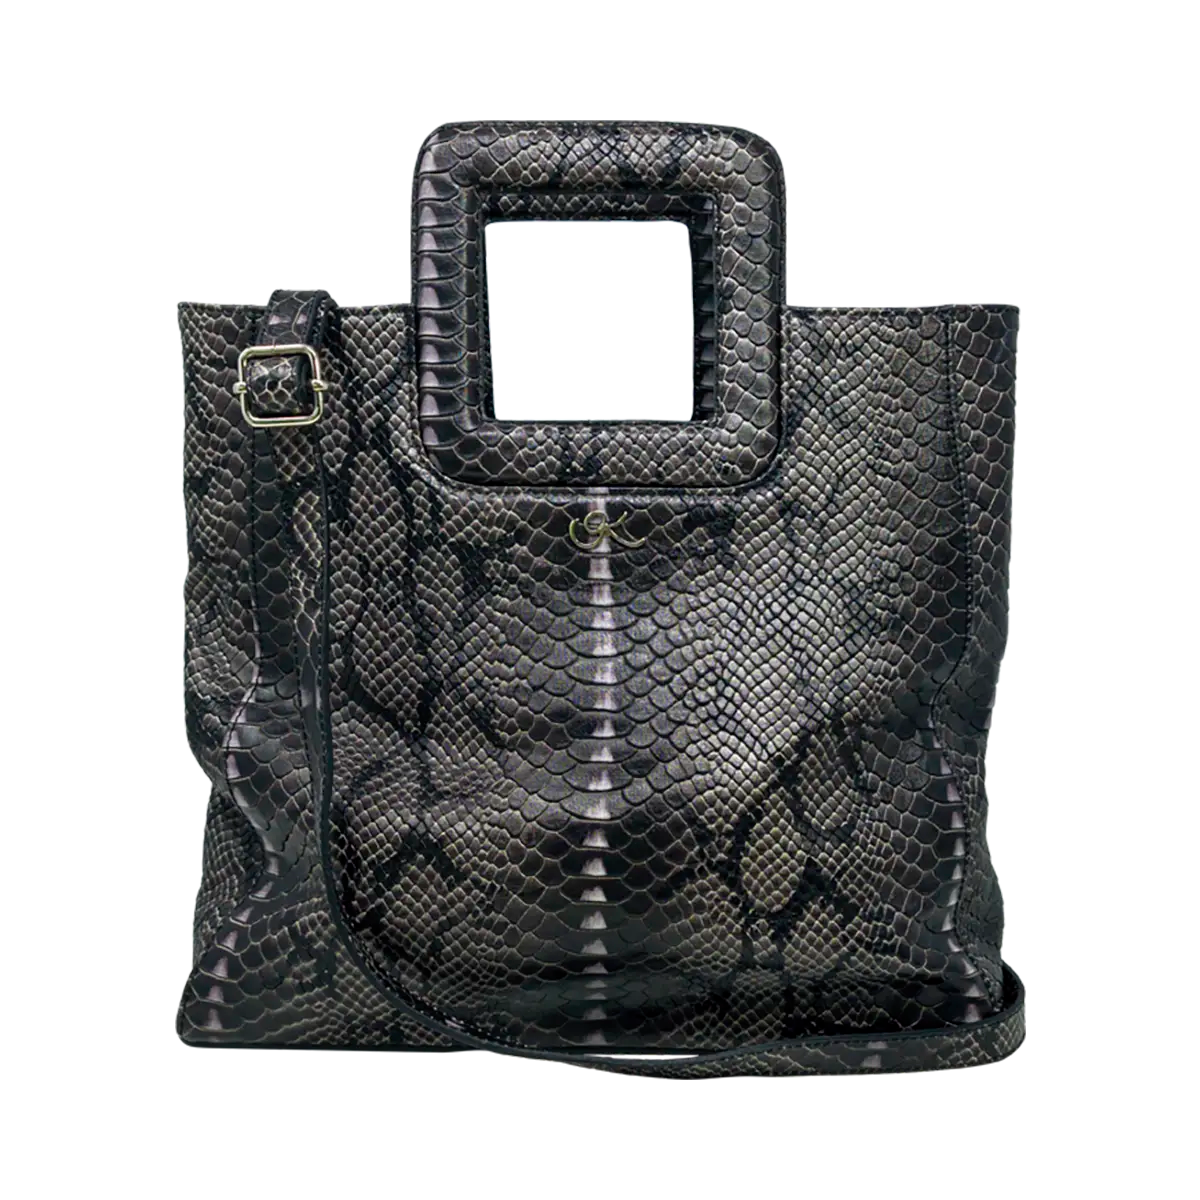 large gray print leather print handbag with a square handle. Accessory for women in San Diego, CA.